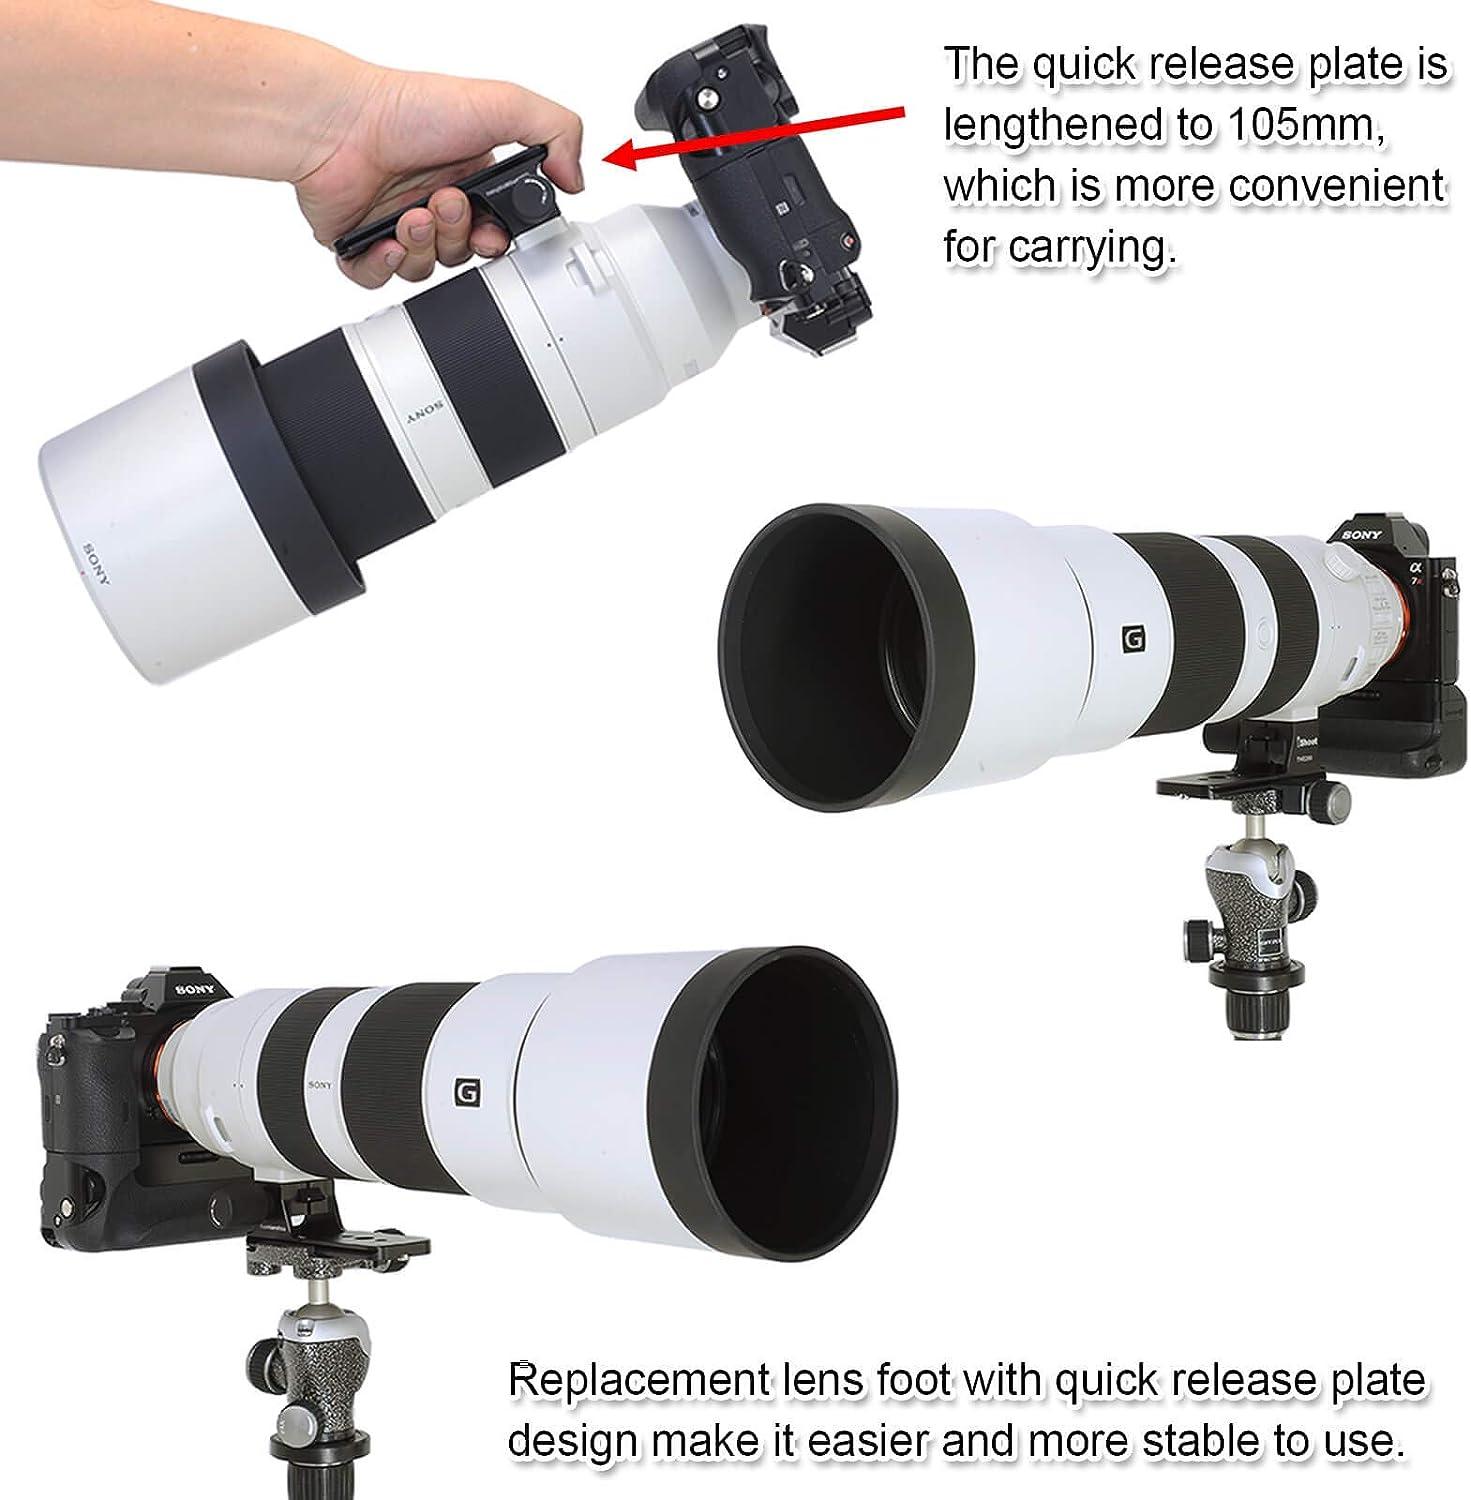 iShoot Replacement Lens Foot IS-THS260 for Sony FE 200-600mm f/5.6-6.3 G OSS  Super Telephoto Zoom E-Mount Lens SEL200600G - Arca-Swiss Style - Built-in  105mm Length Quick Release Plate